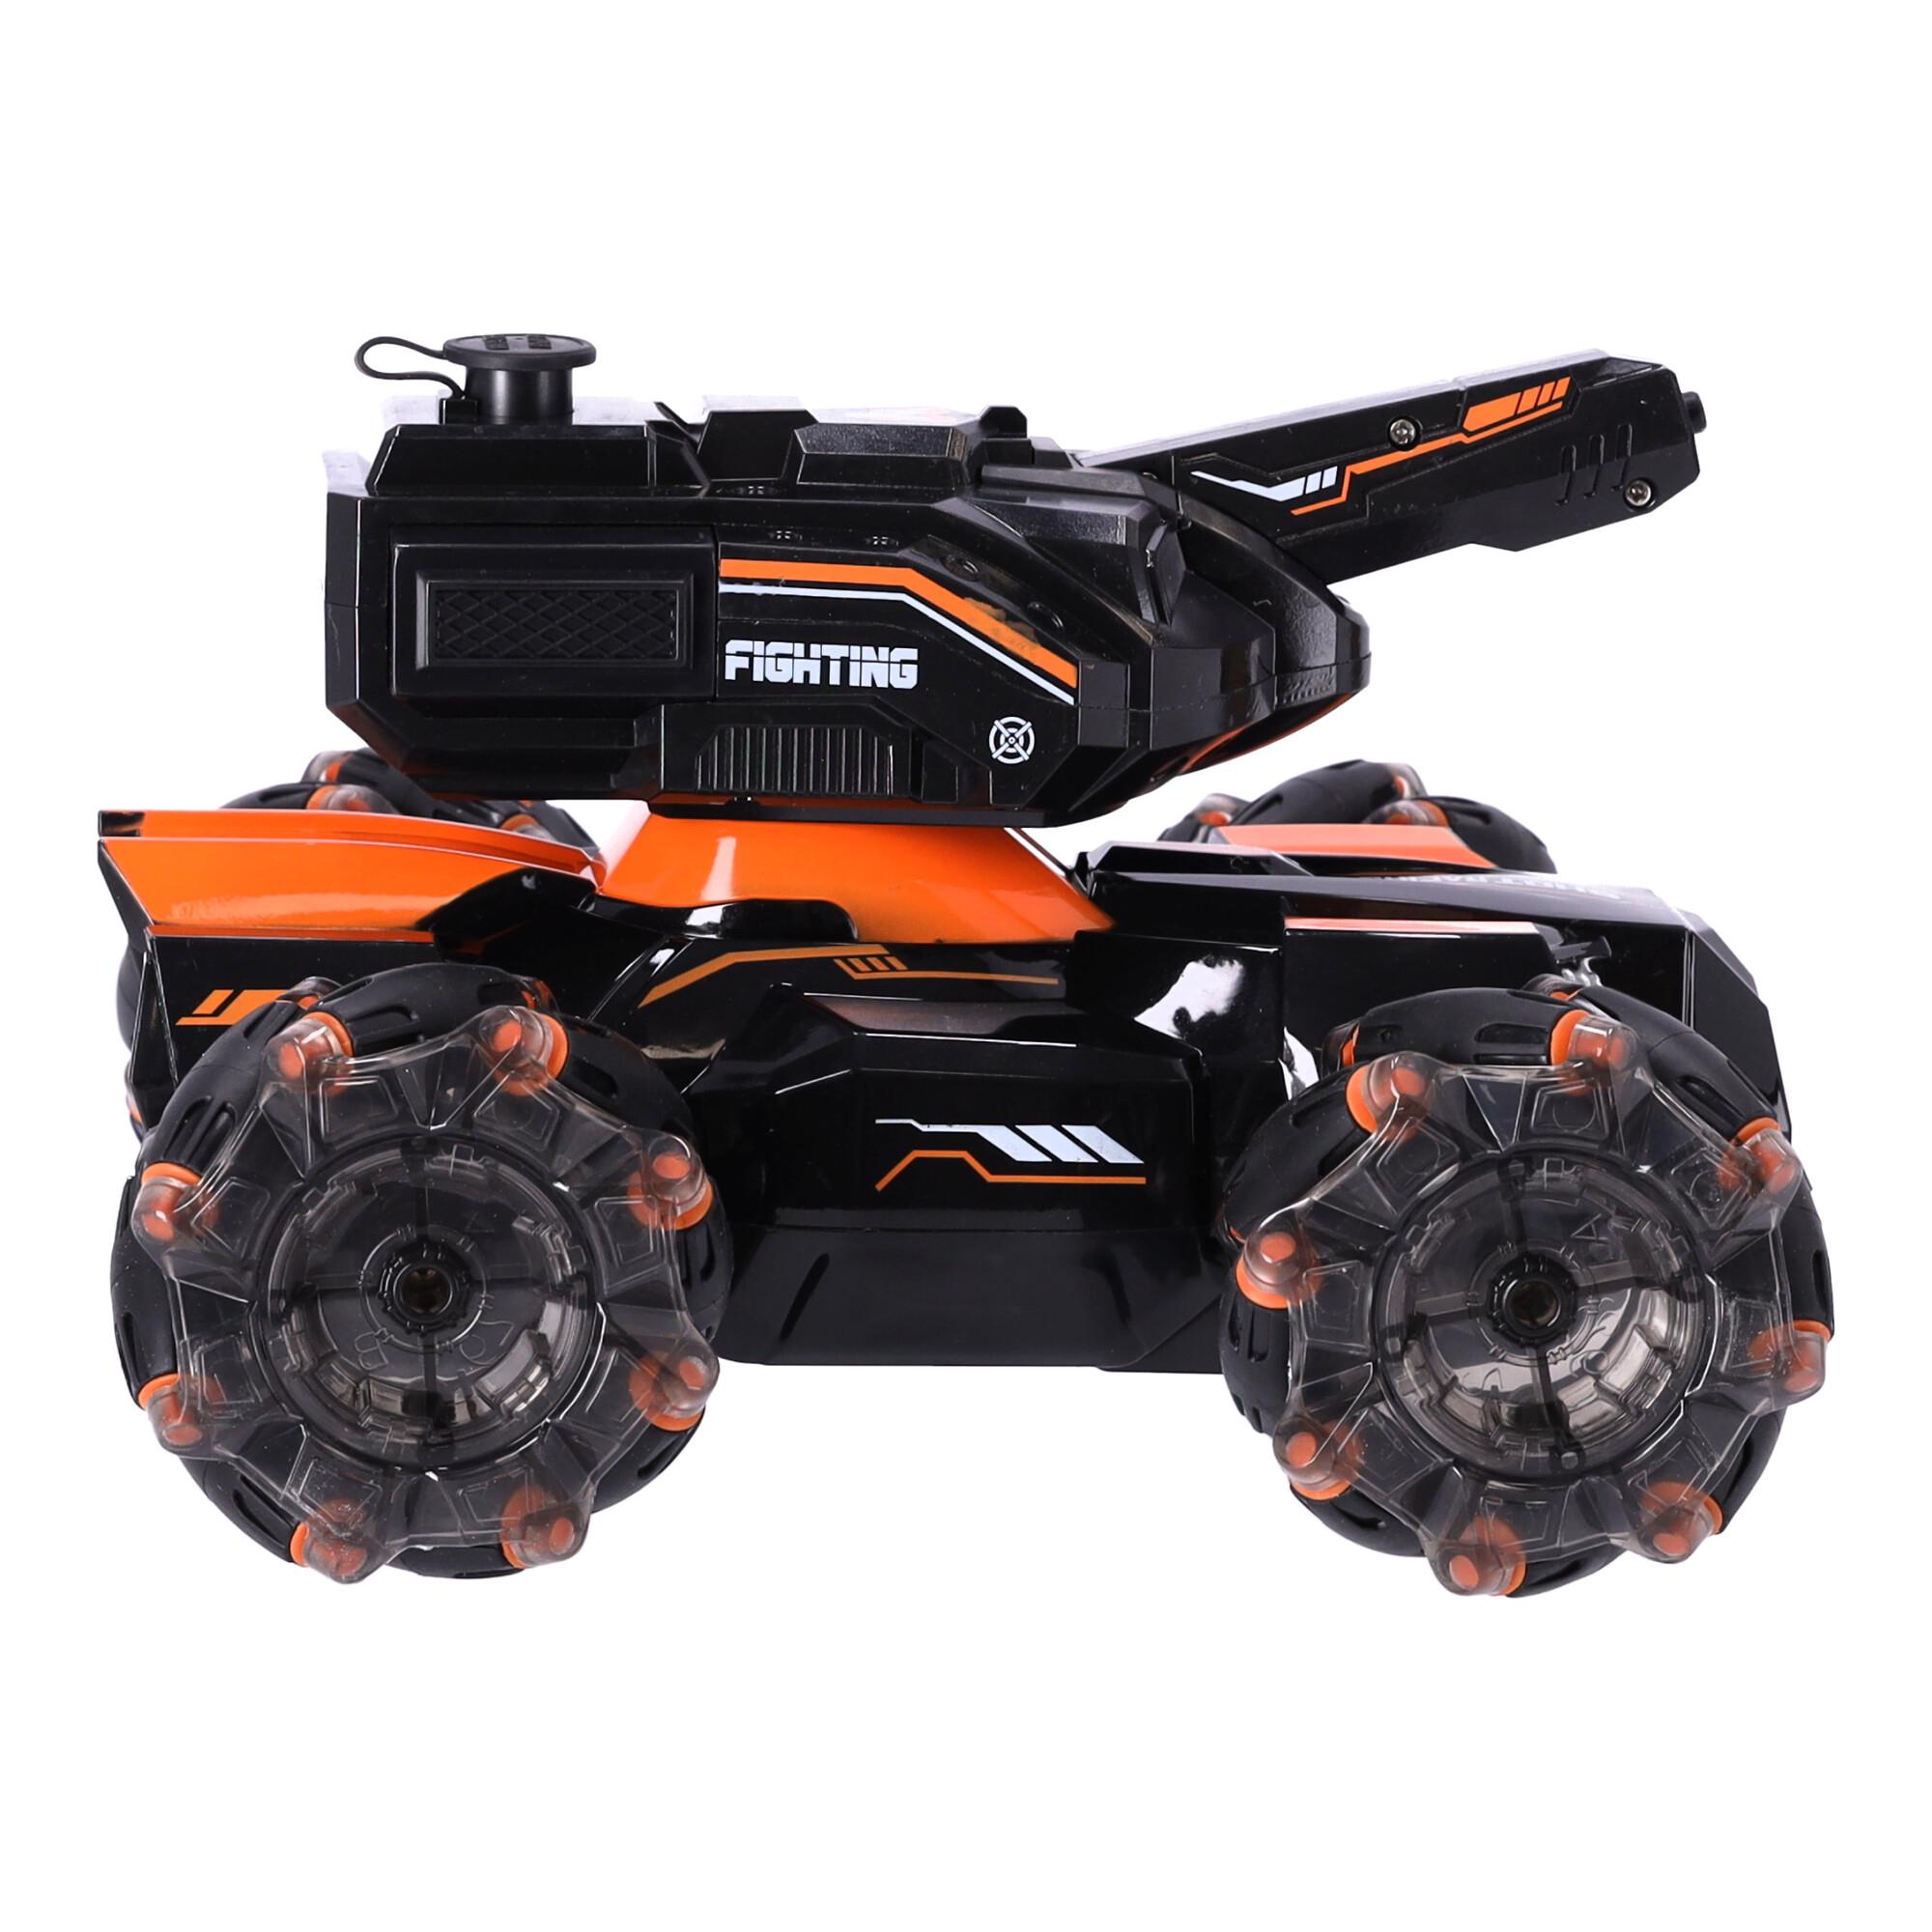 Car, RC stunt tank with water bomb UKC041B, gesture-controlled, controller, remote control - orange.